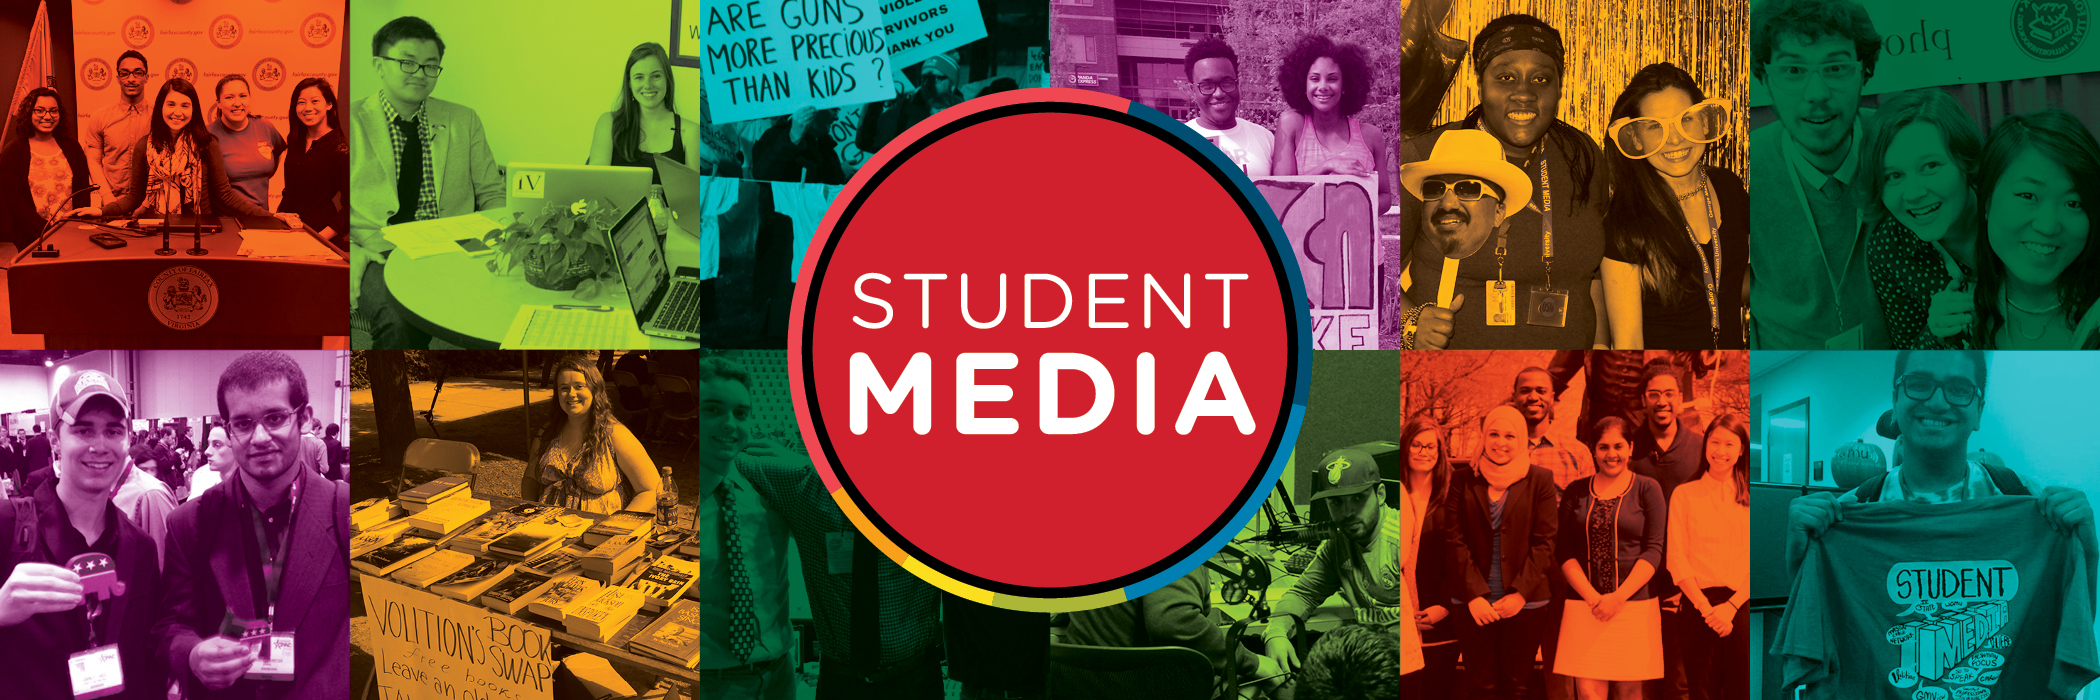 Student media feature image